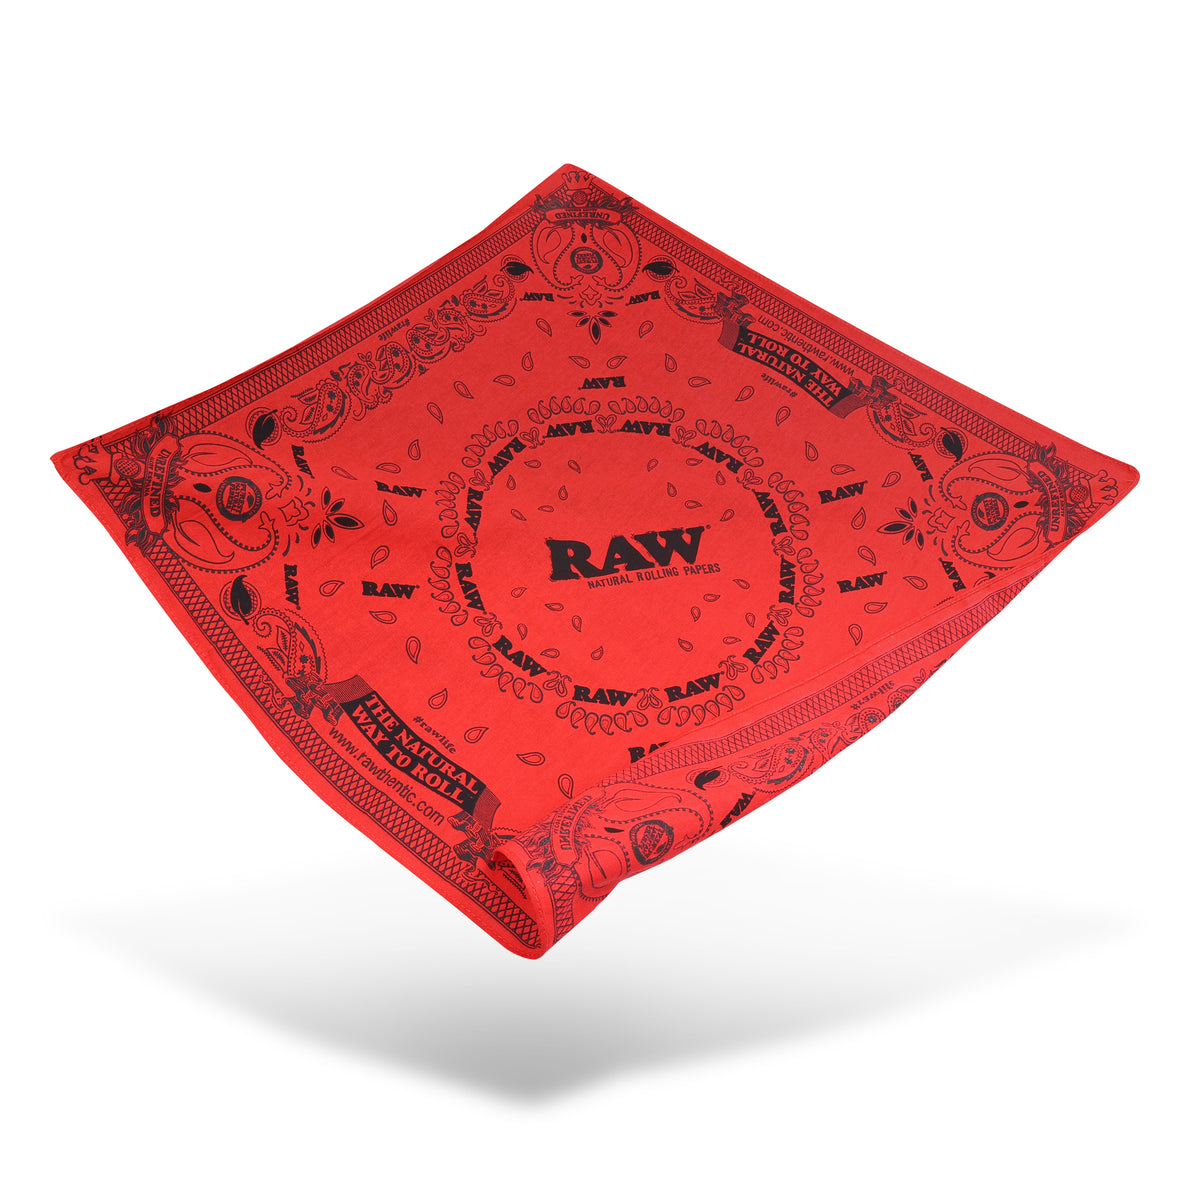 RAW Bandana Clothing Accessories esd-official